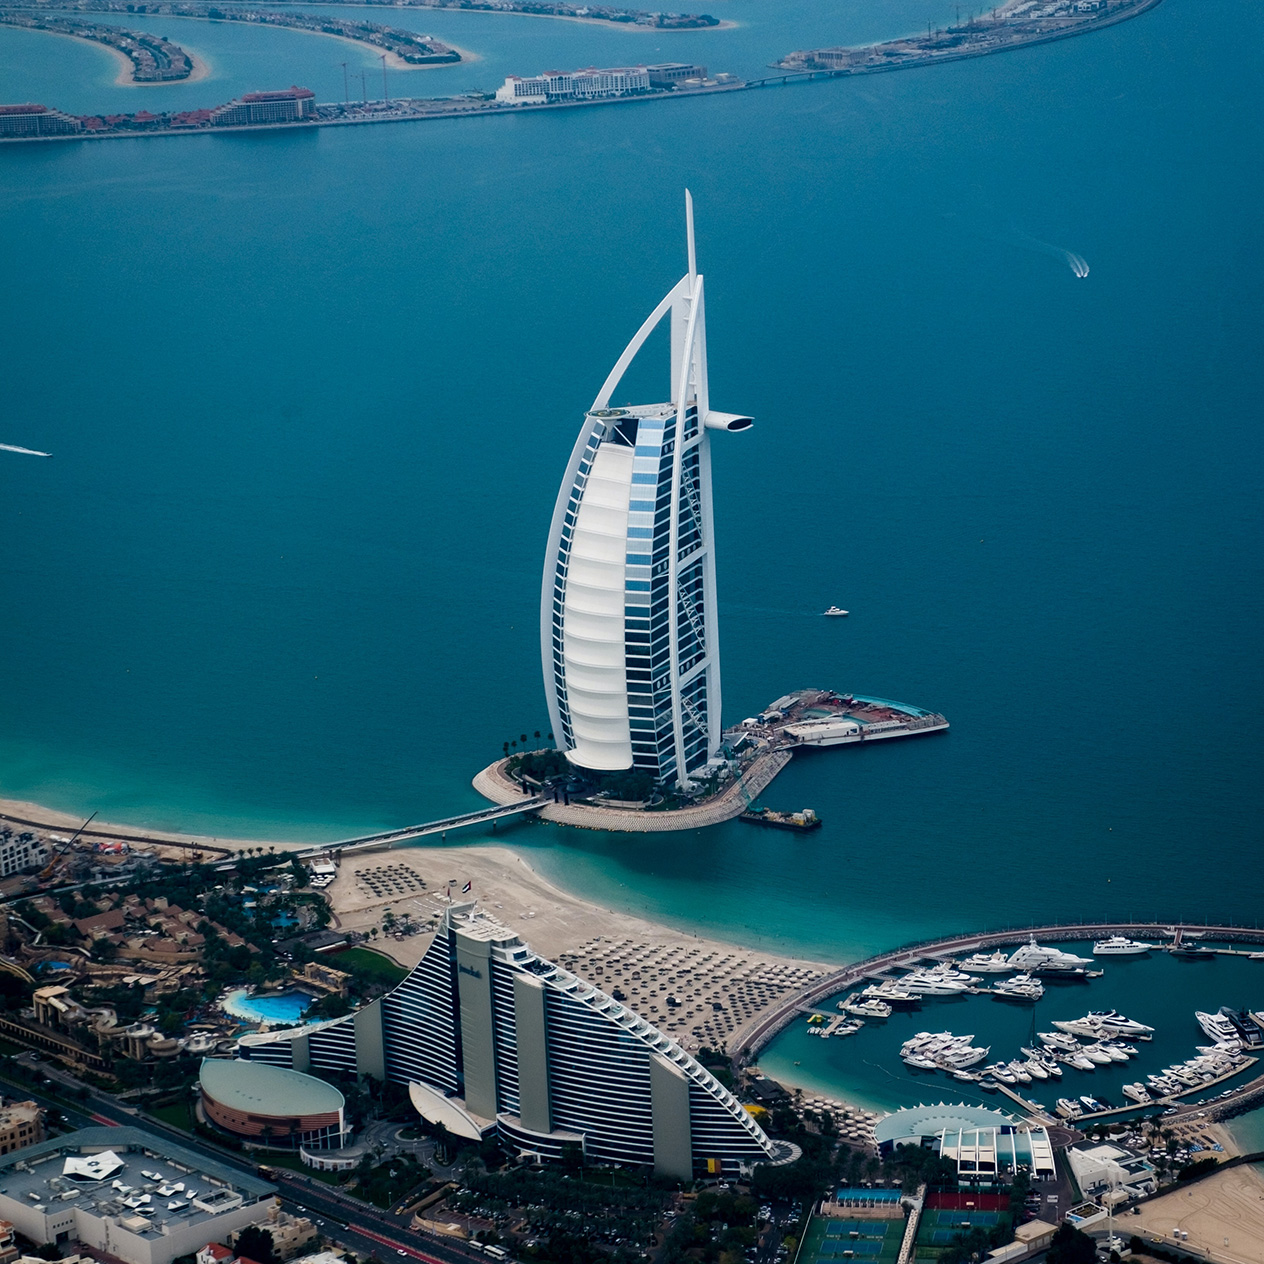 Photo of Burj Al Arab. The luxury hotel located a small distance from the mainland on a man made island.